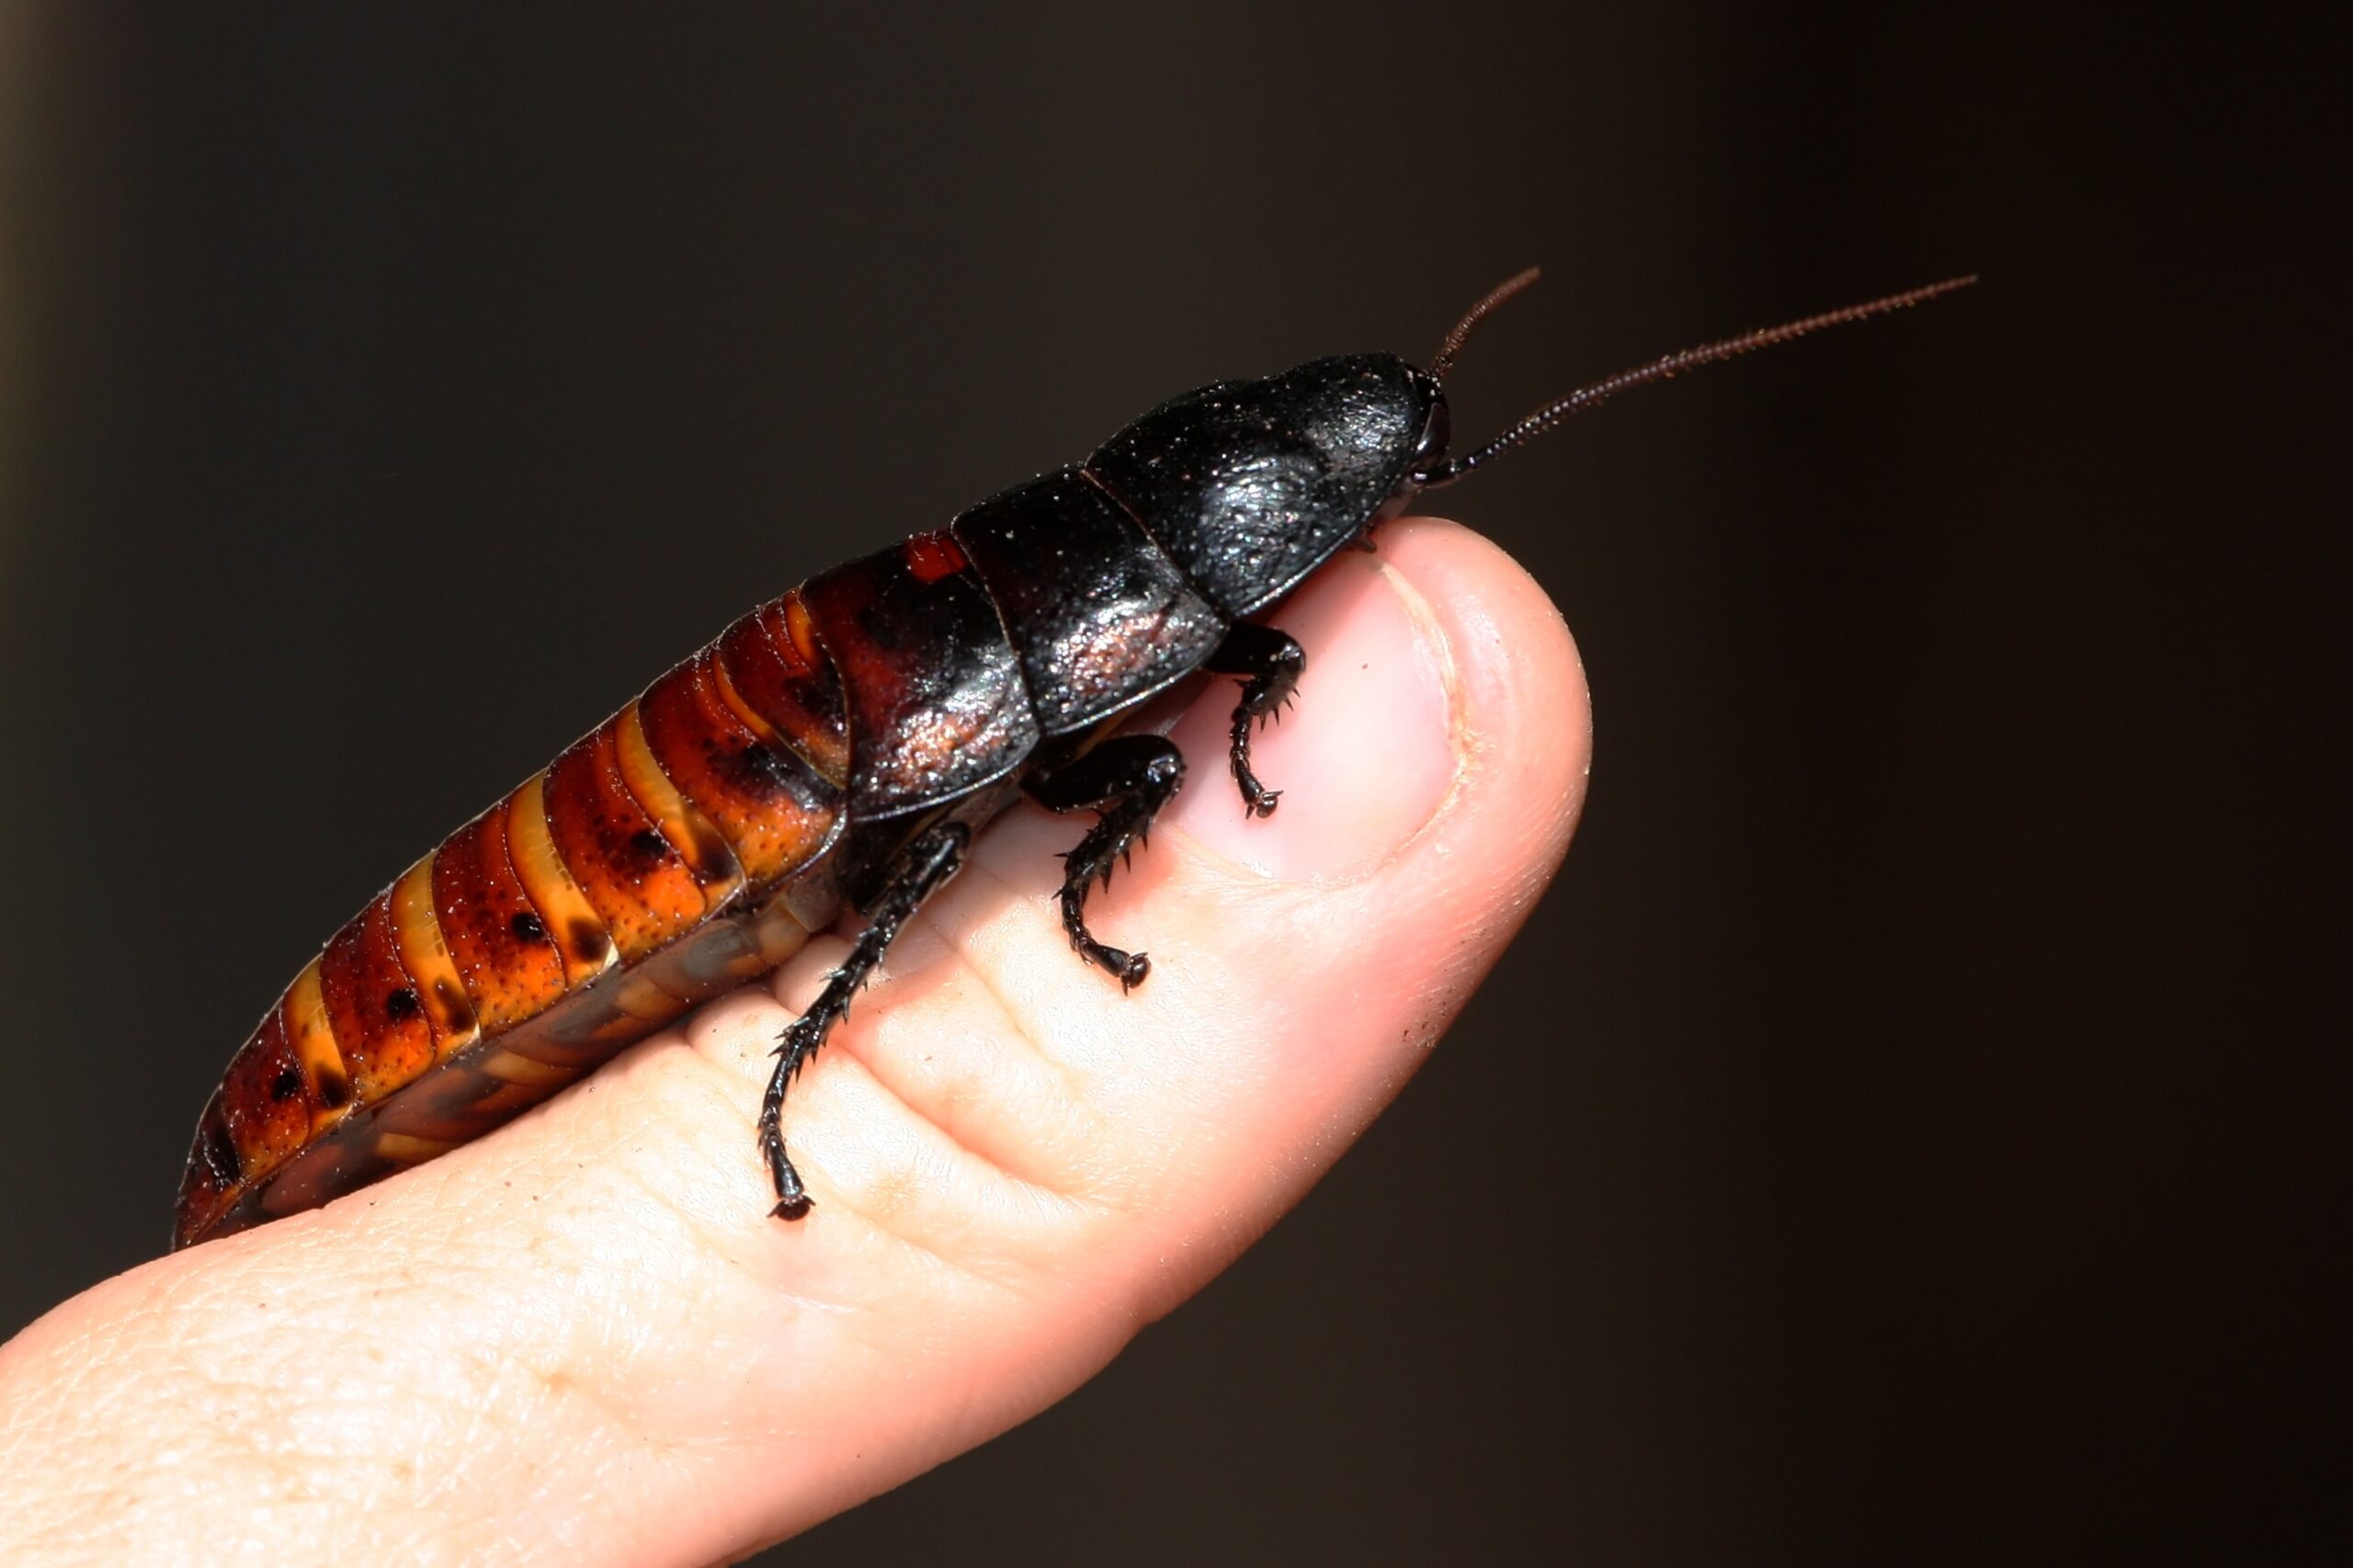 Large Madagascan Hissing Cockroach On A Person's Thumb